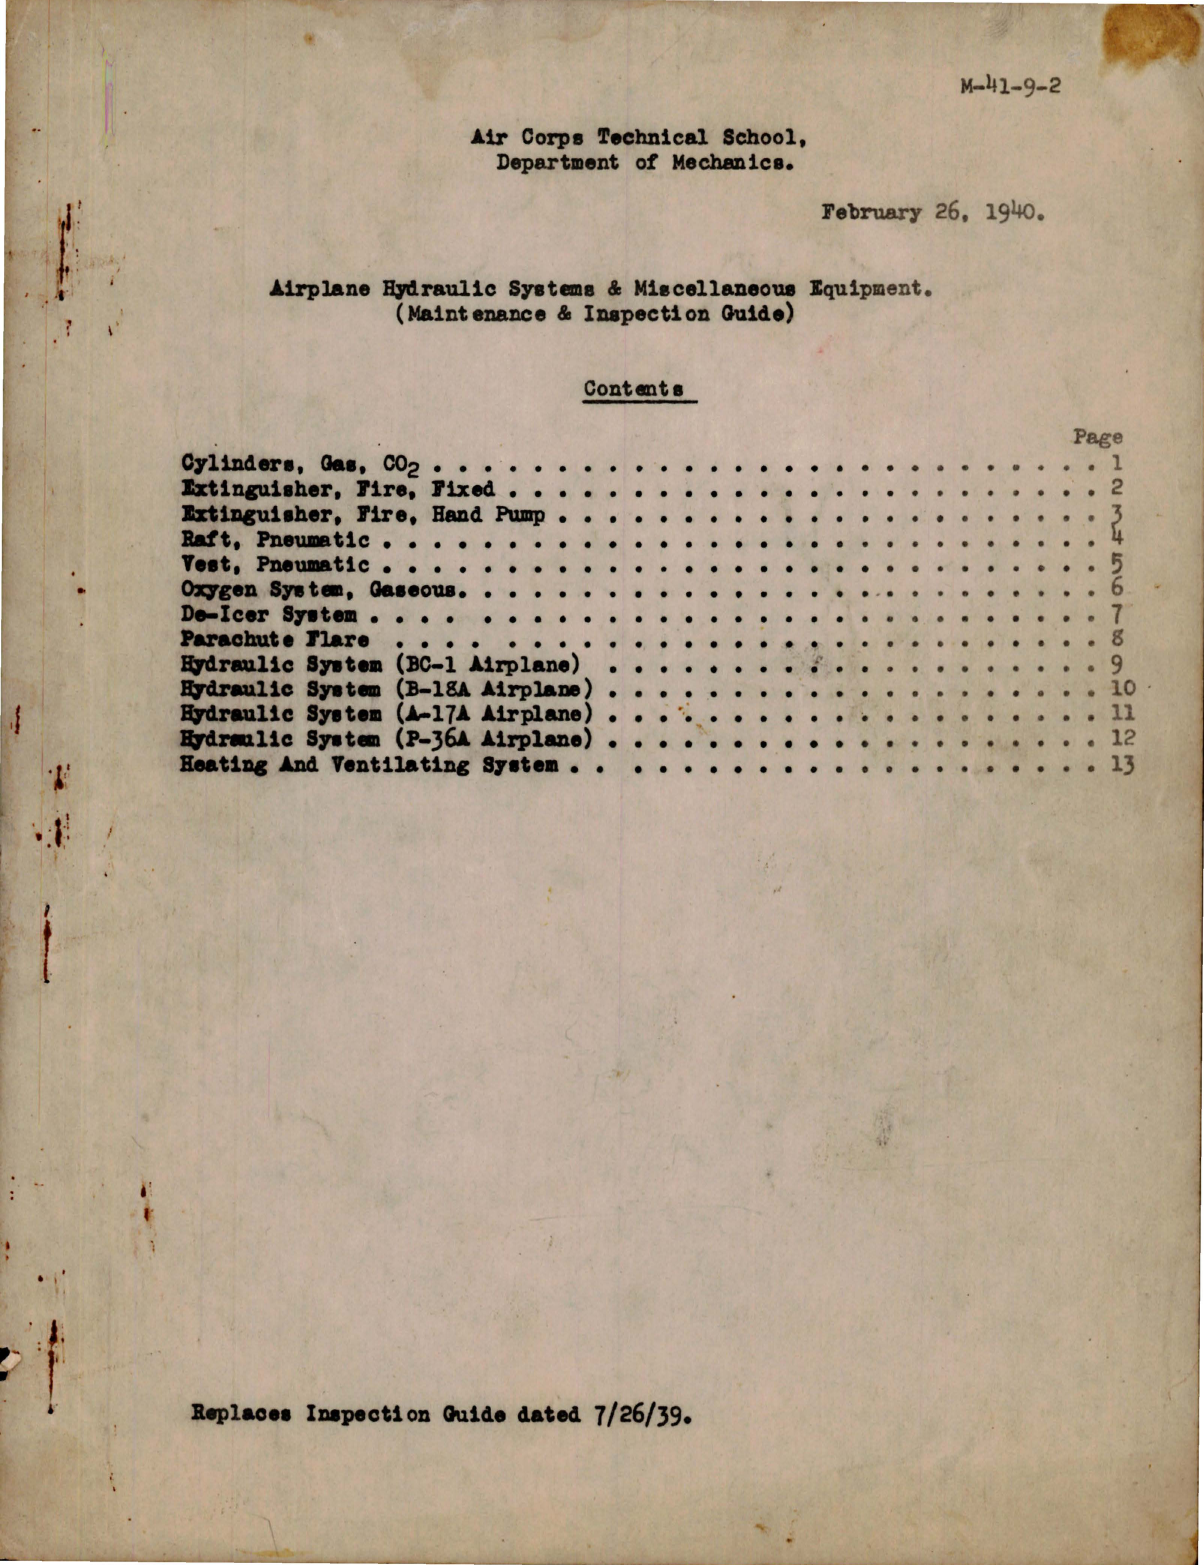 Sample page 1 from AirCorps Library document: Air Corps Technical Schools - Maintenance and Inspection Guide - Hydraulic Systems & Miscellaneous Equipment